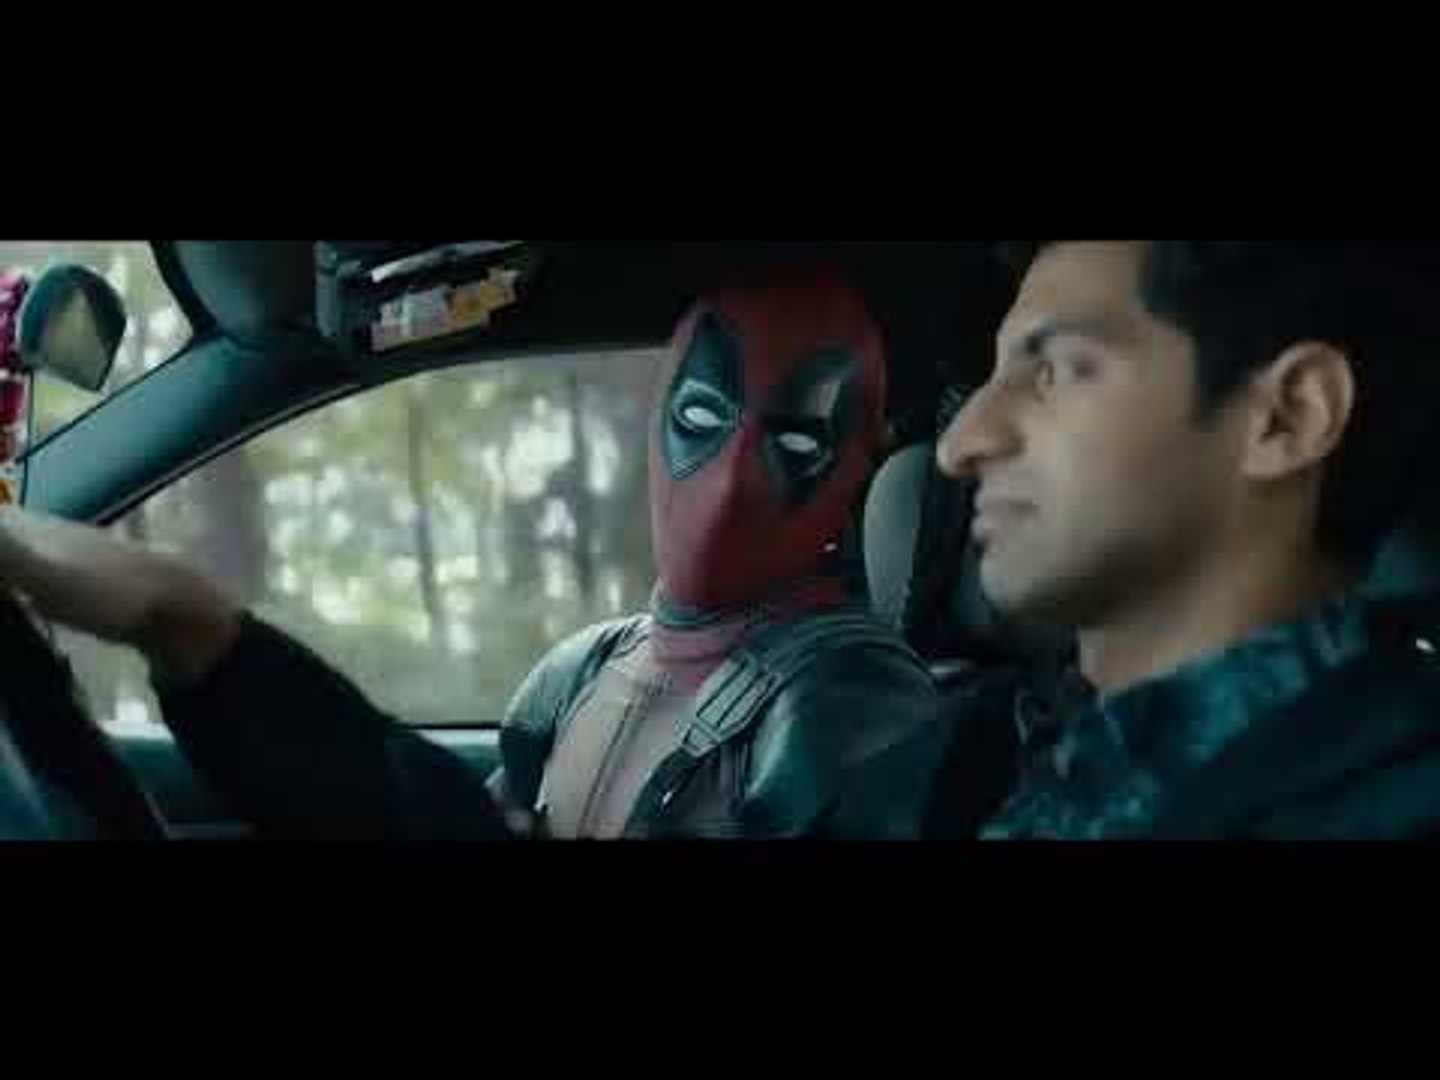 Deadpool 2 Juggernaut Vs Colossus Fight Scene First Look Movieclip 2018 Movieclips Trailers